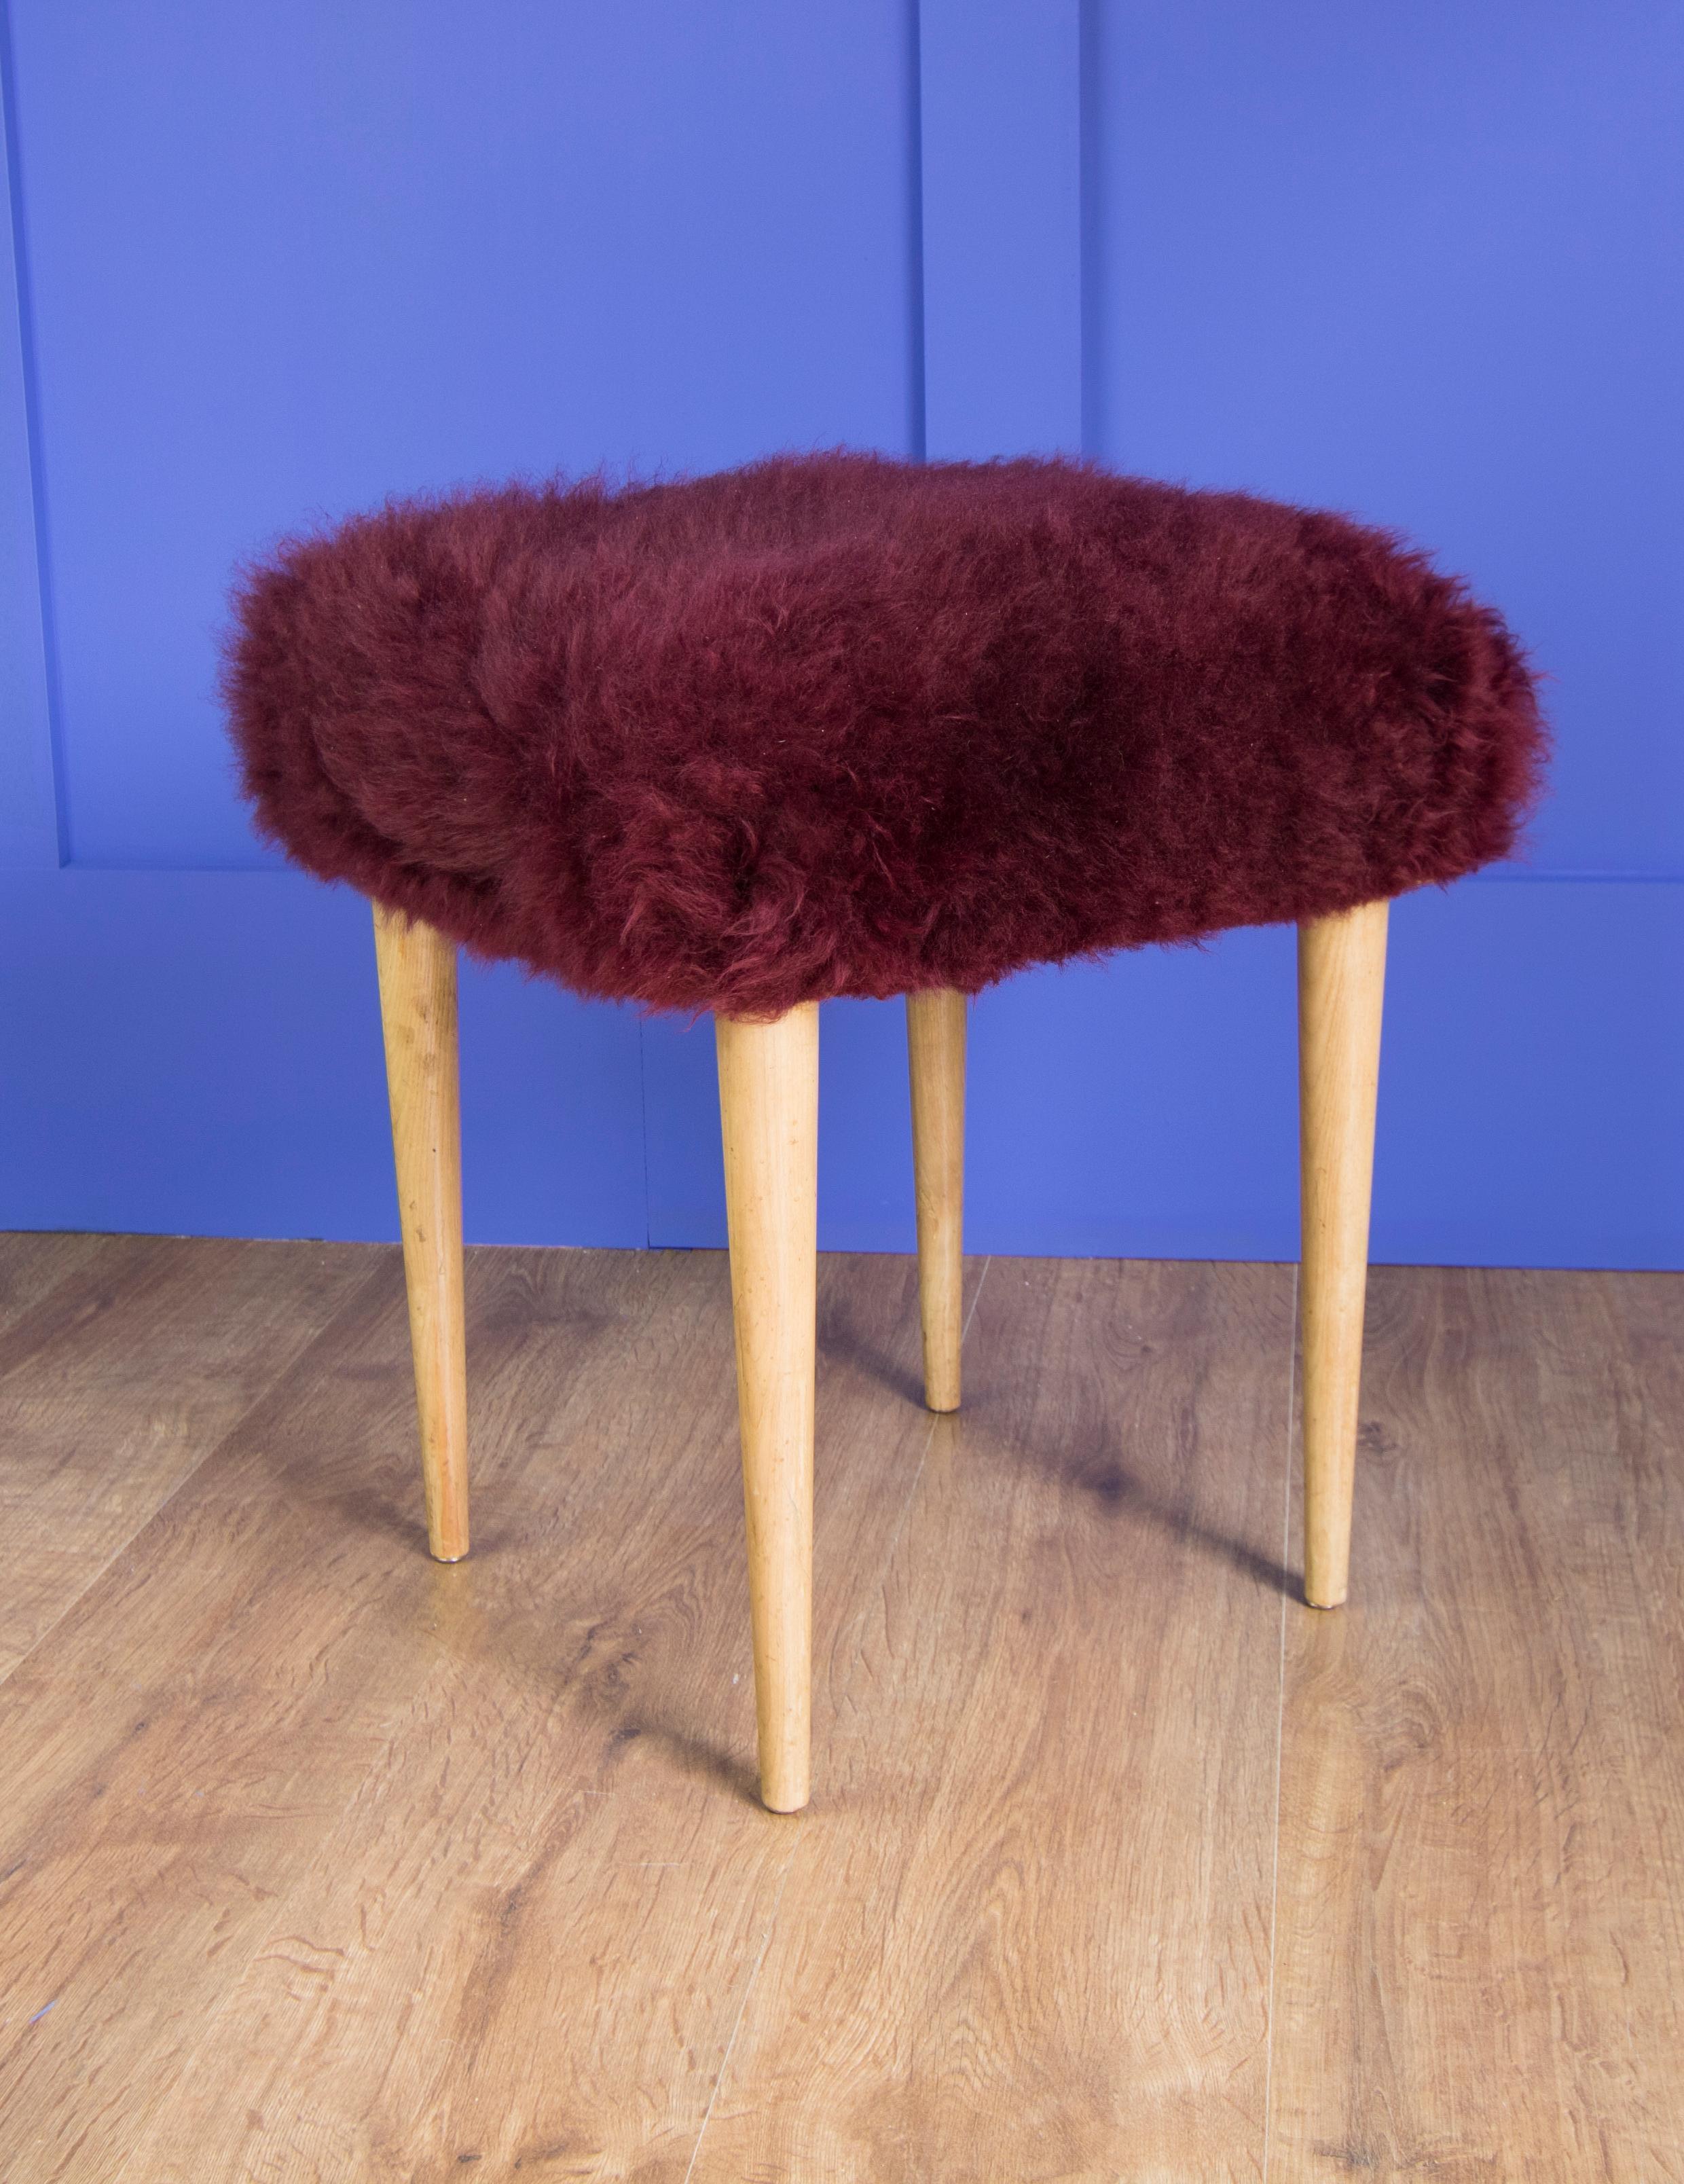 This little stool has been sympathetically restored to its former midcentury glory with vintage burgundy sheepskin. Pale wood legs. Luxuriously dense sheepkin super soft finish in this unusual color.